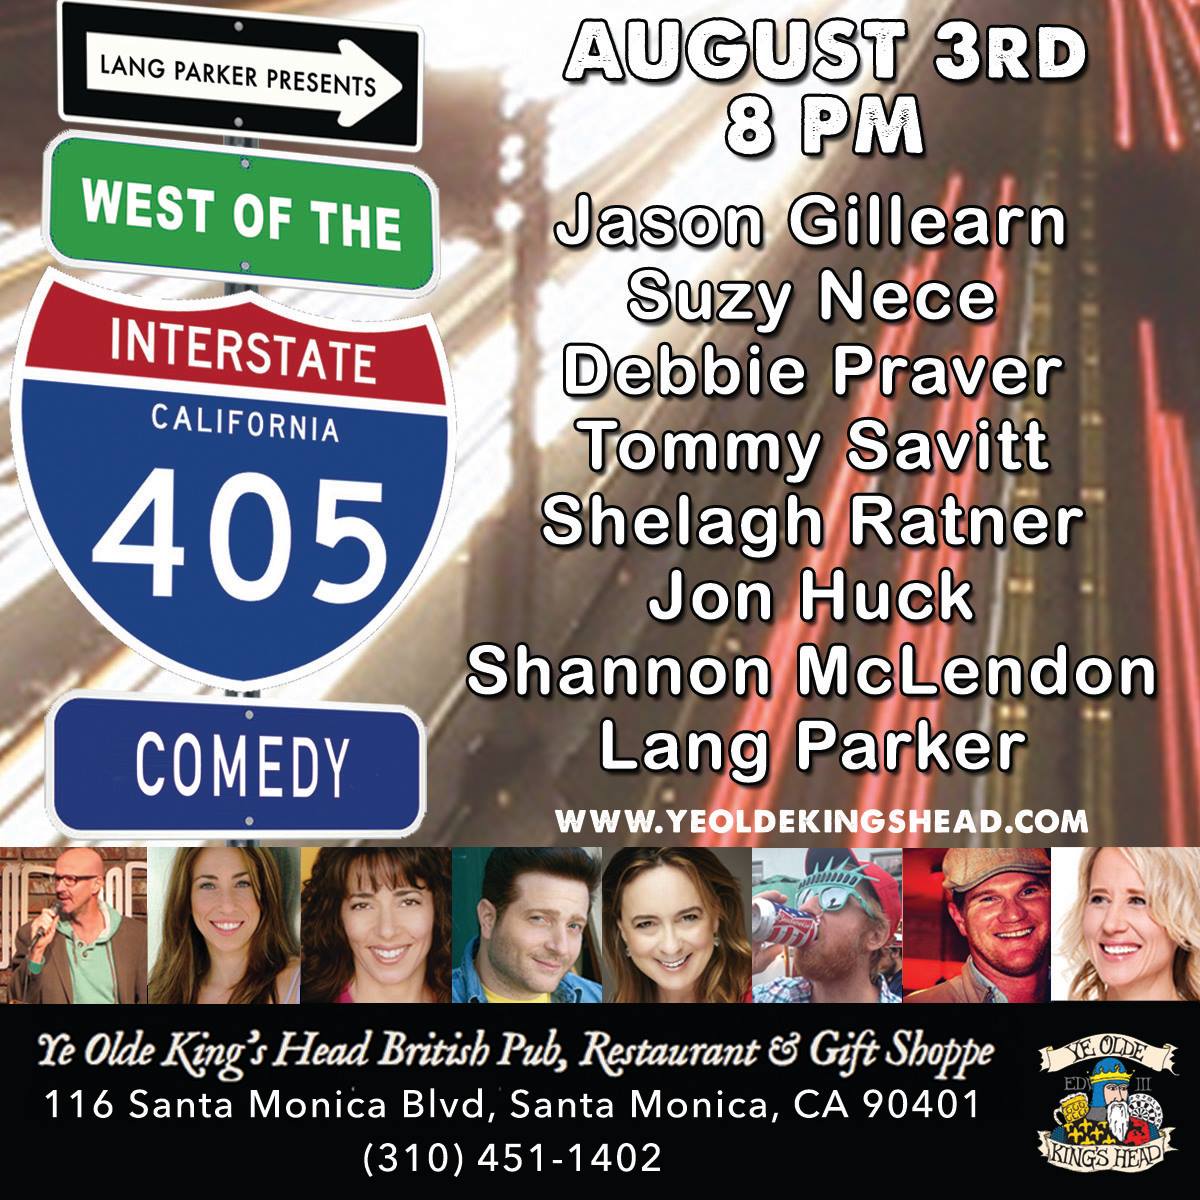 West of the 405 Comedy